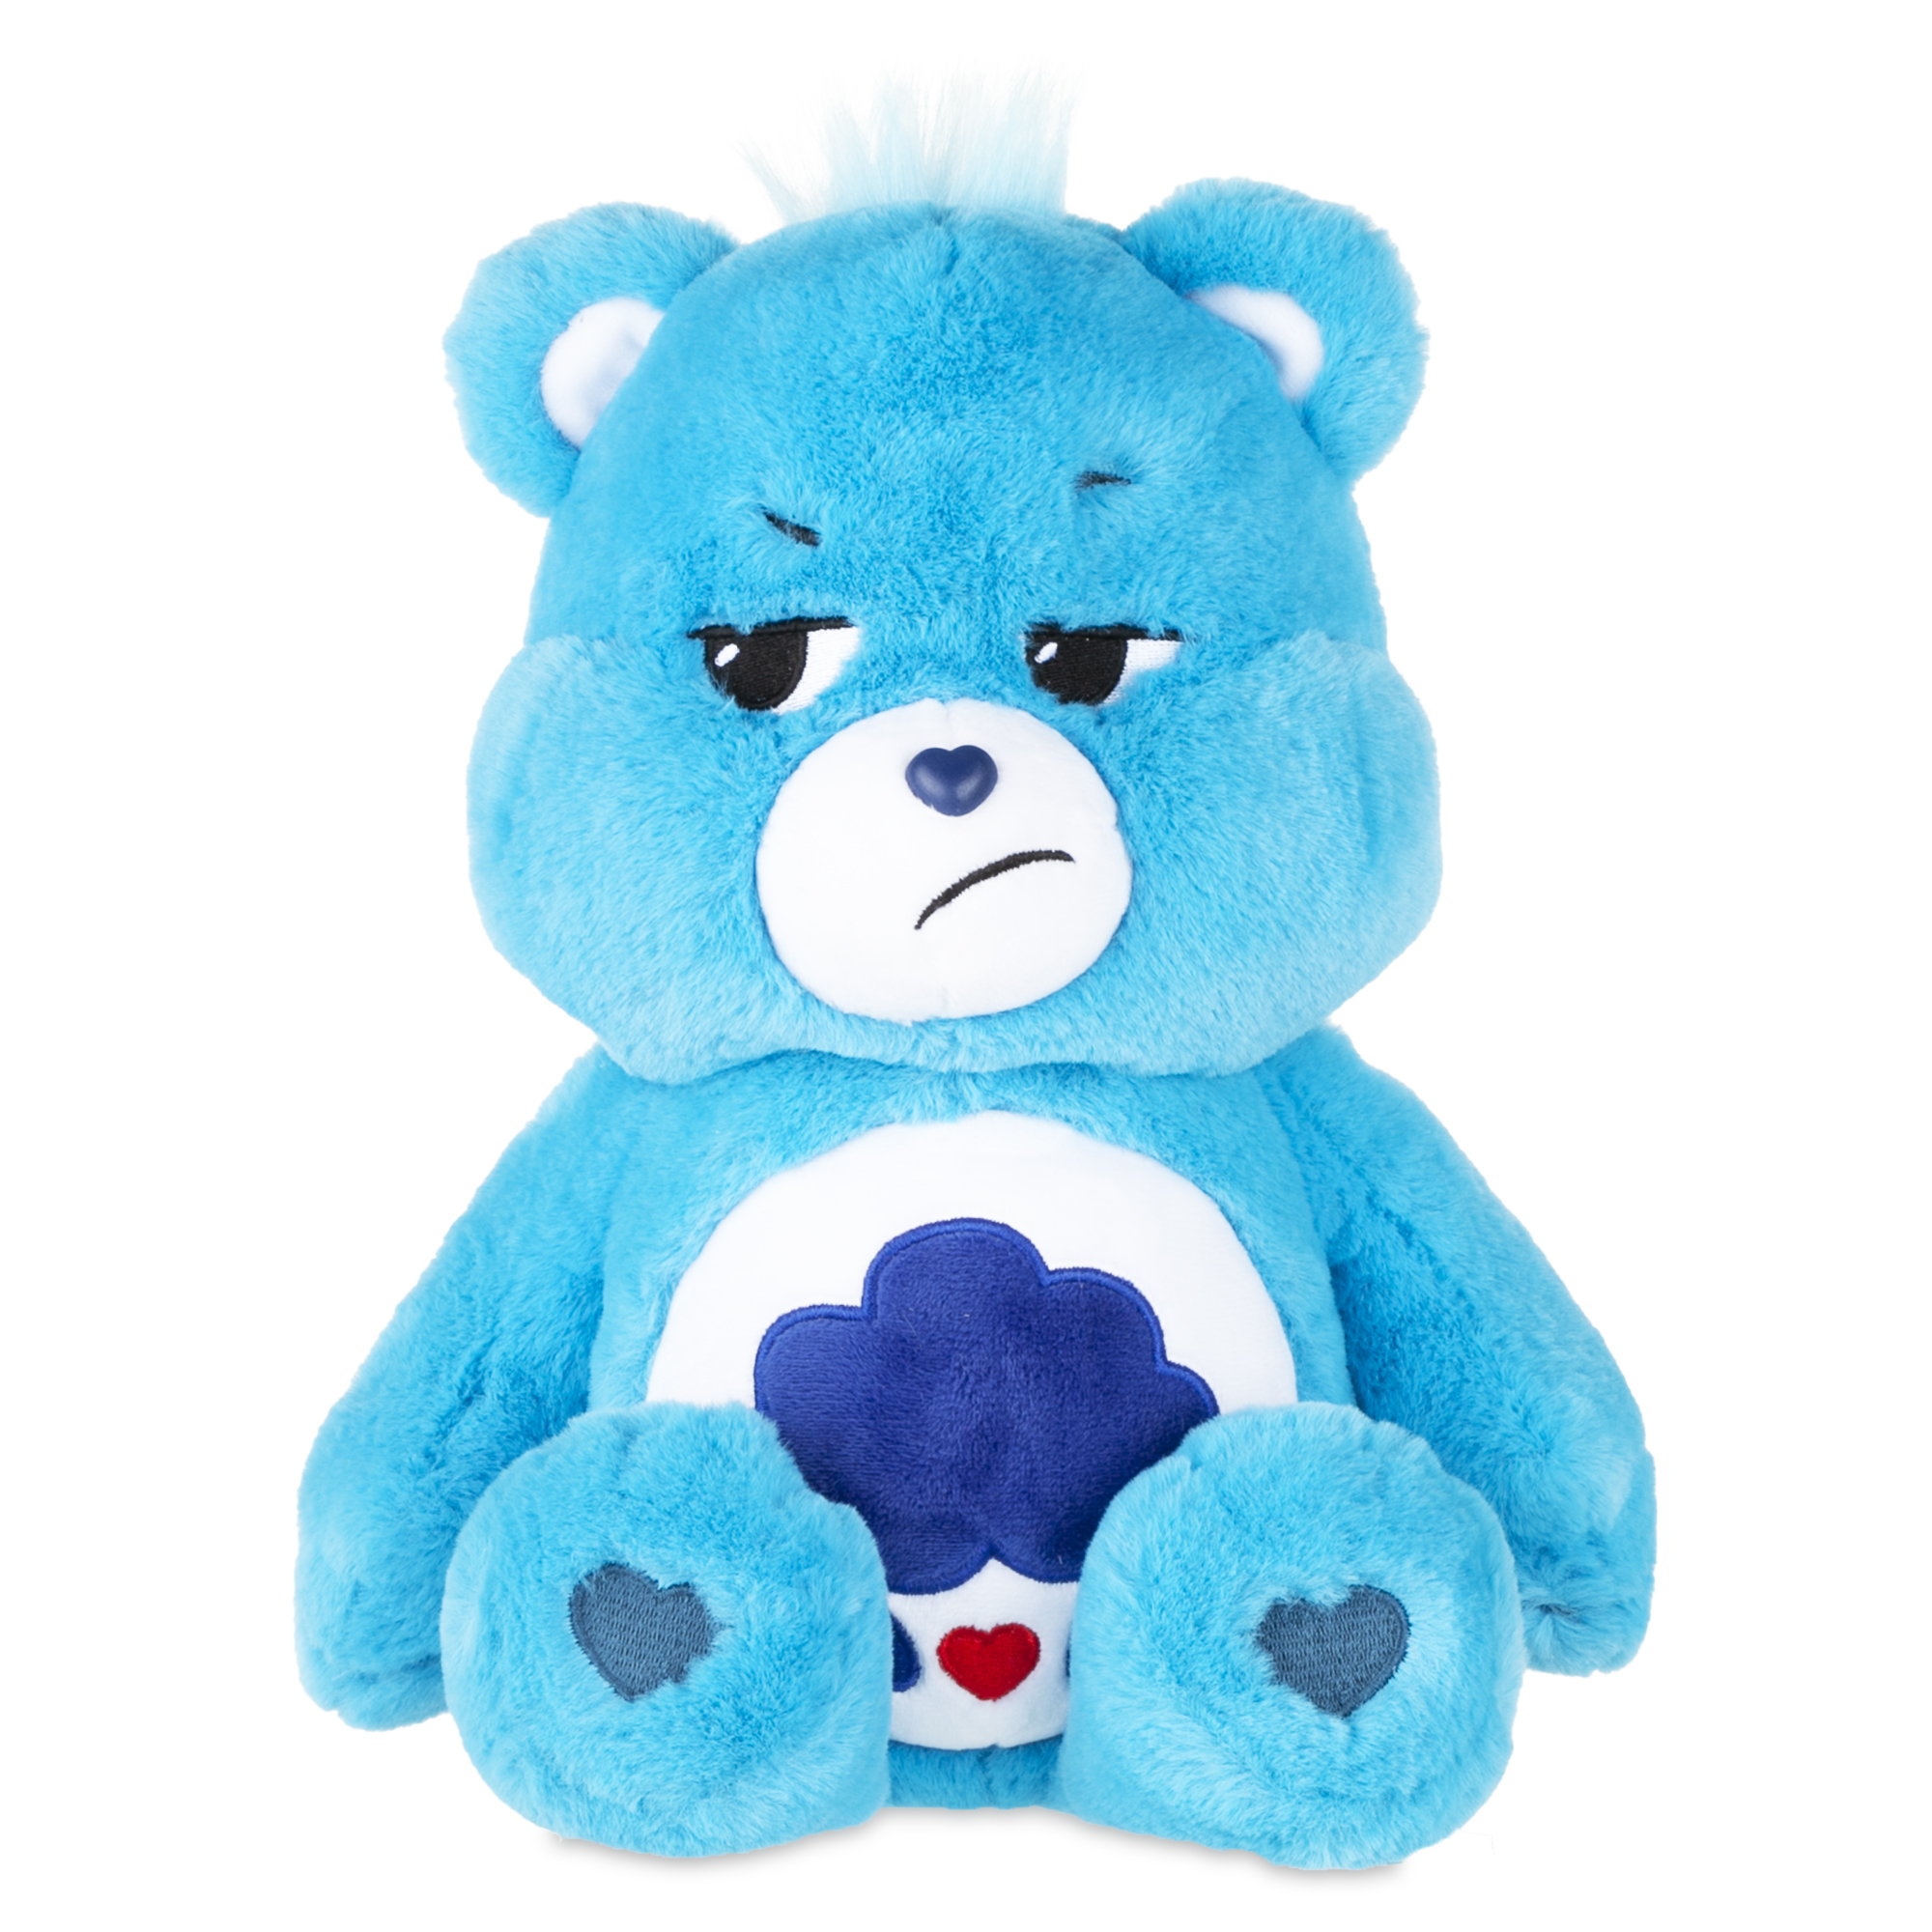 Care Bears 14 Plush - I Care Bear - Soft Recycled Material!